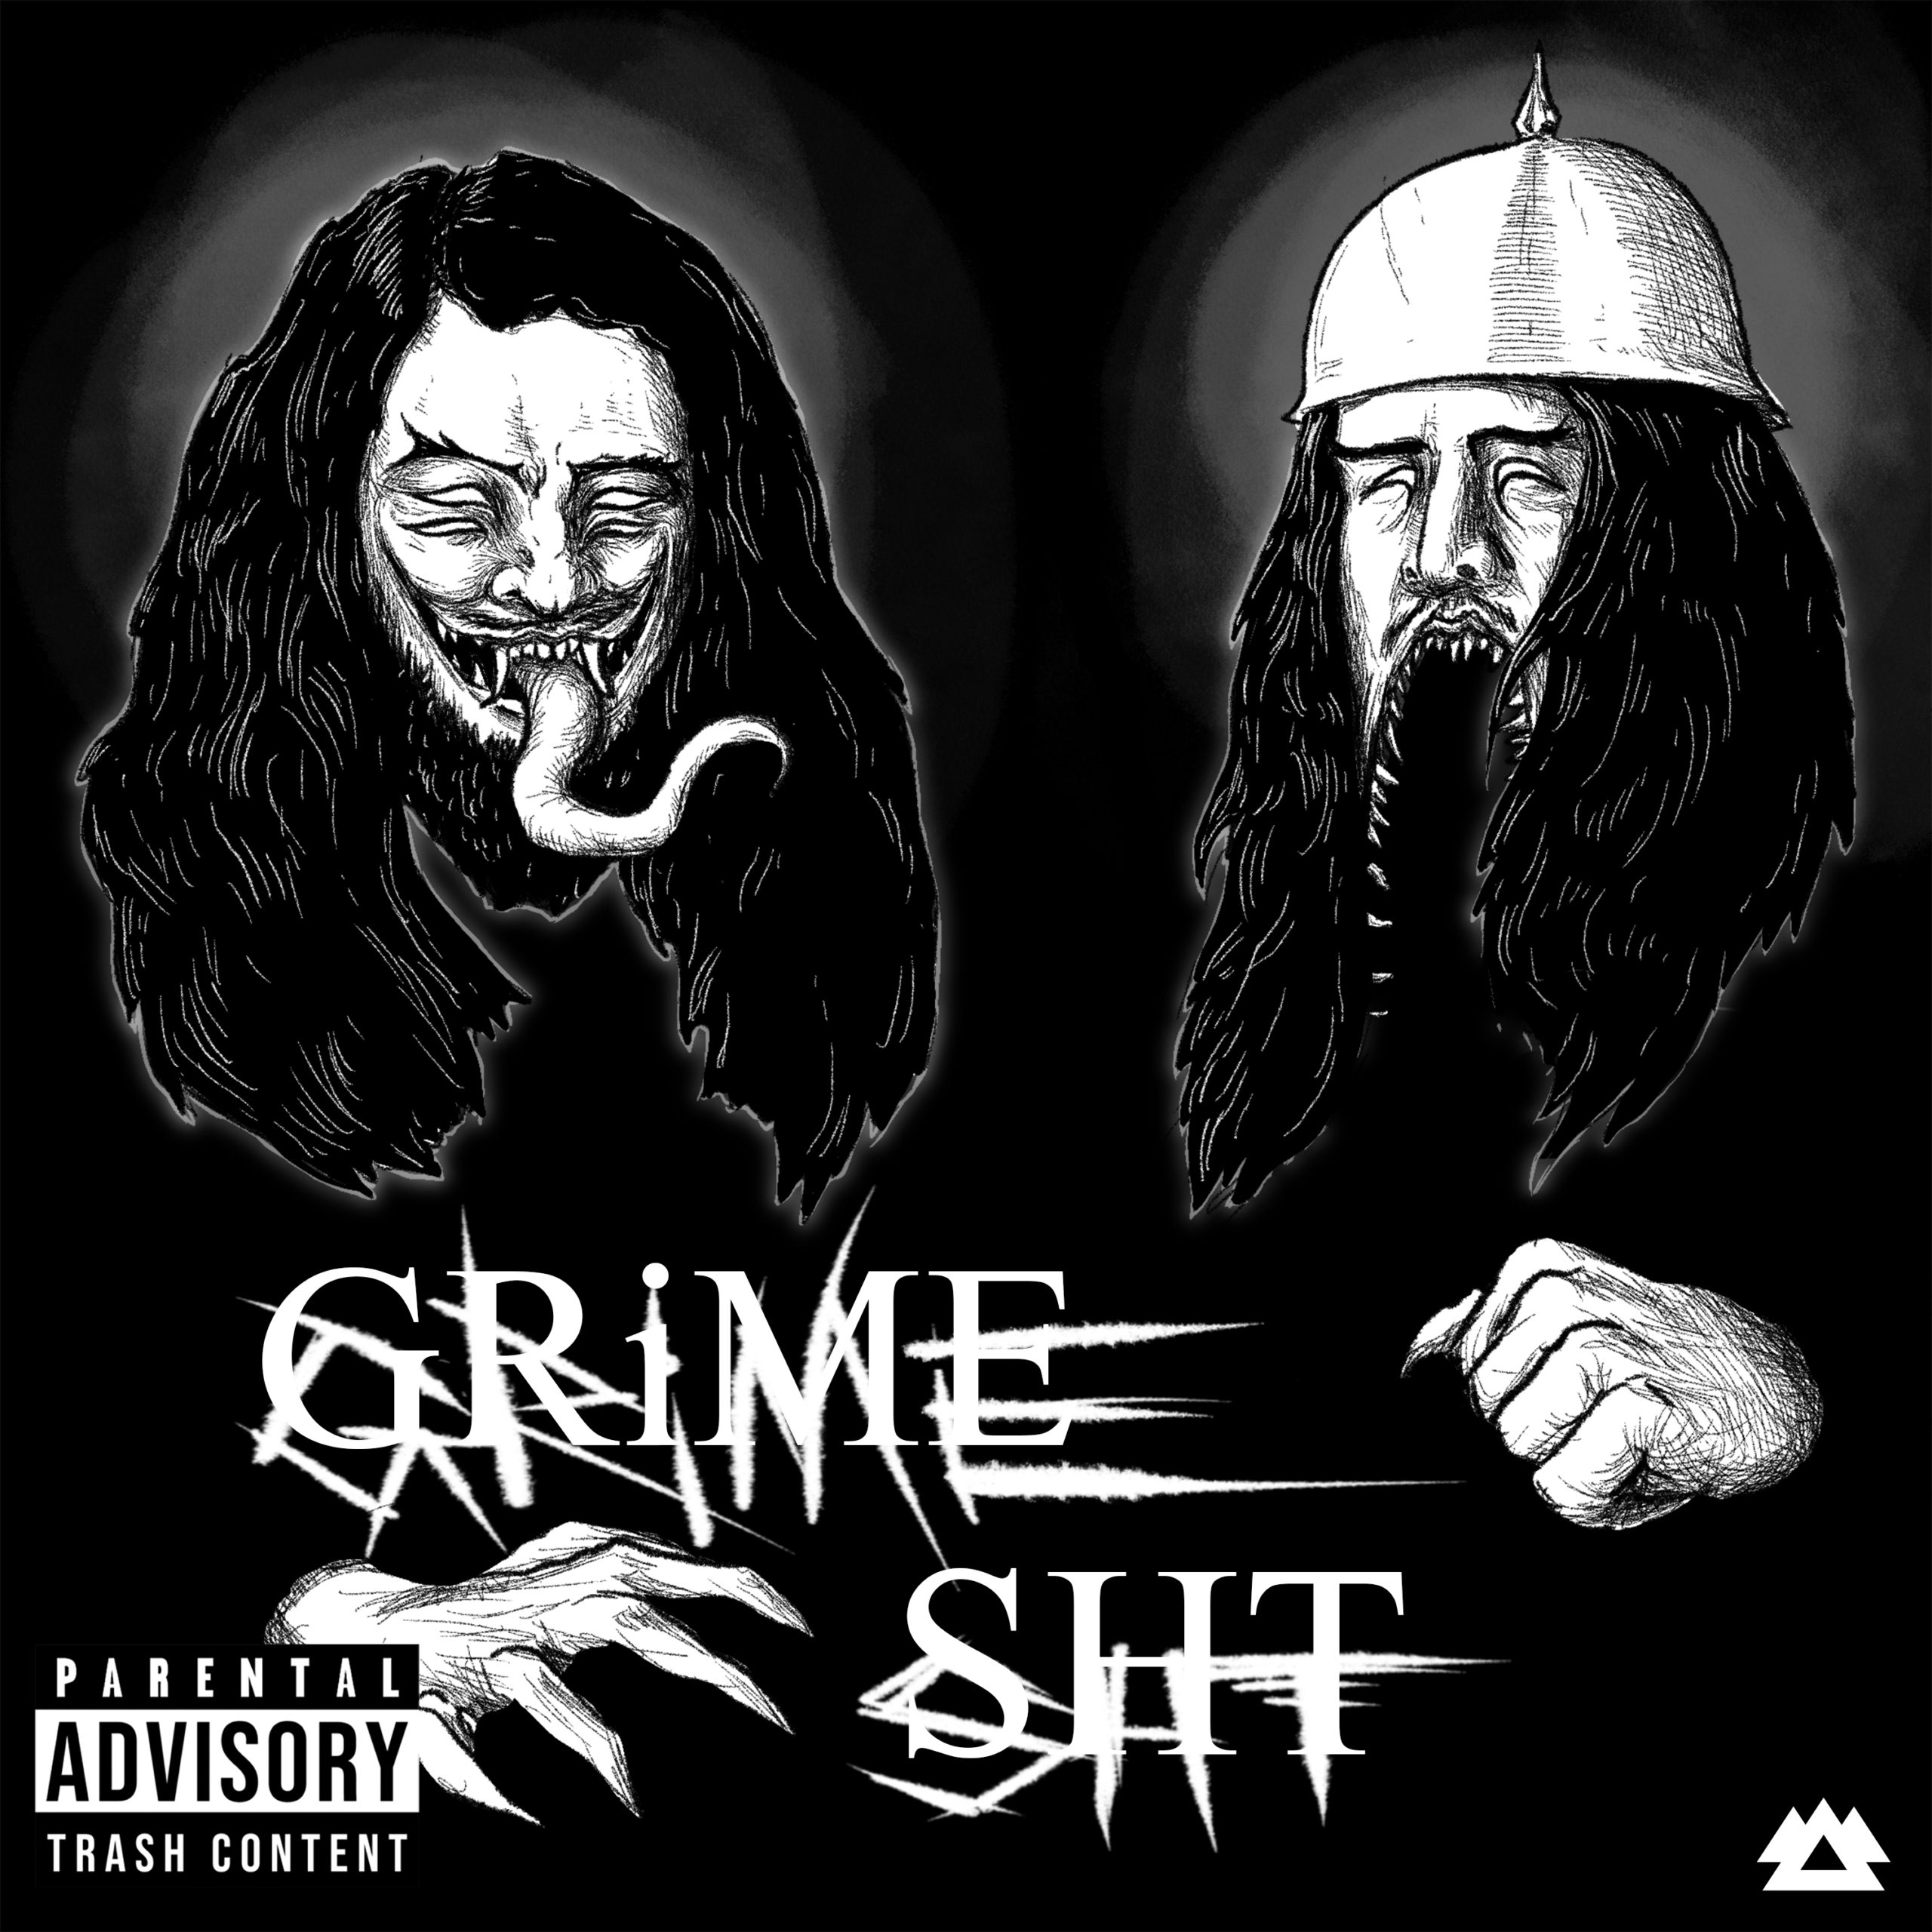 The latest from YOOKiE – GRiME SHT